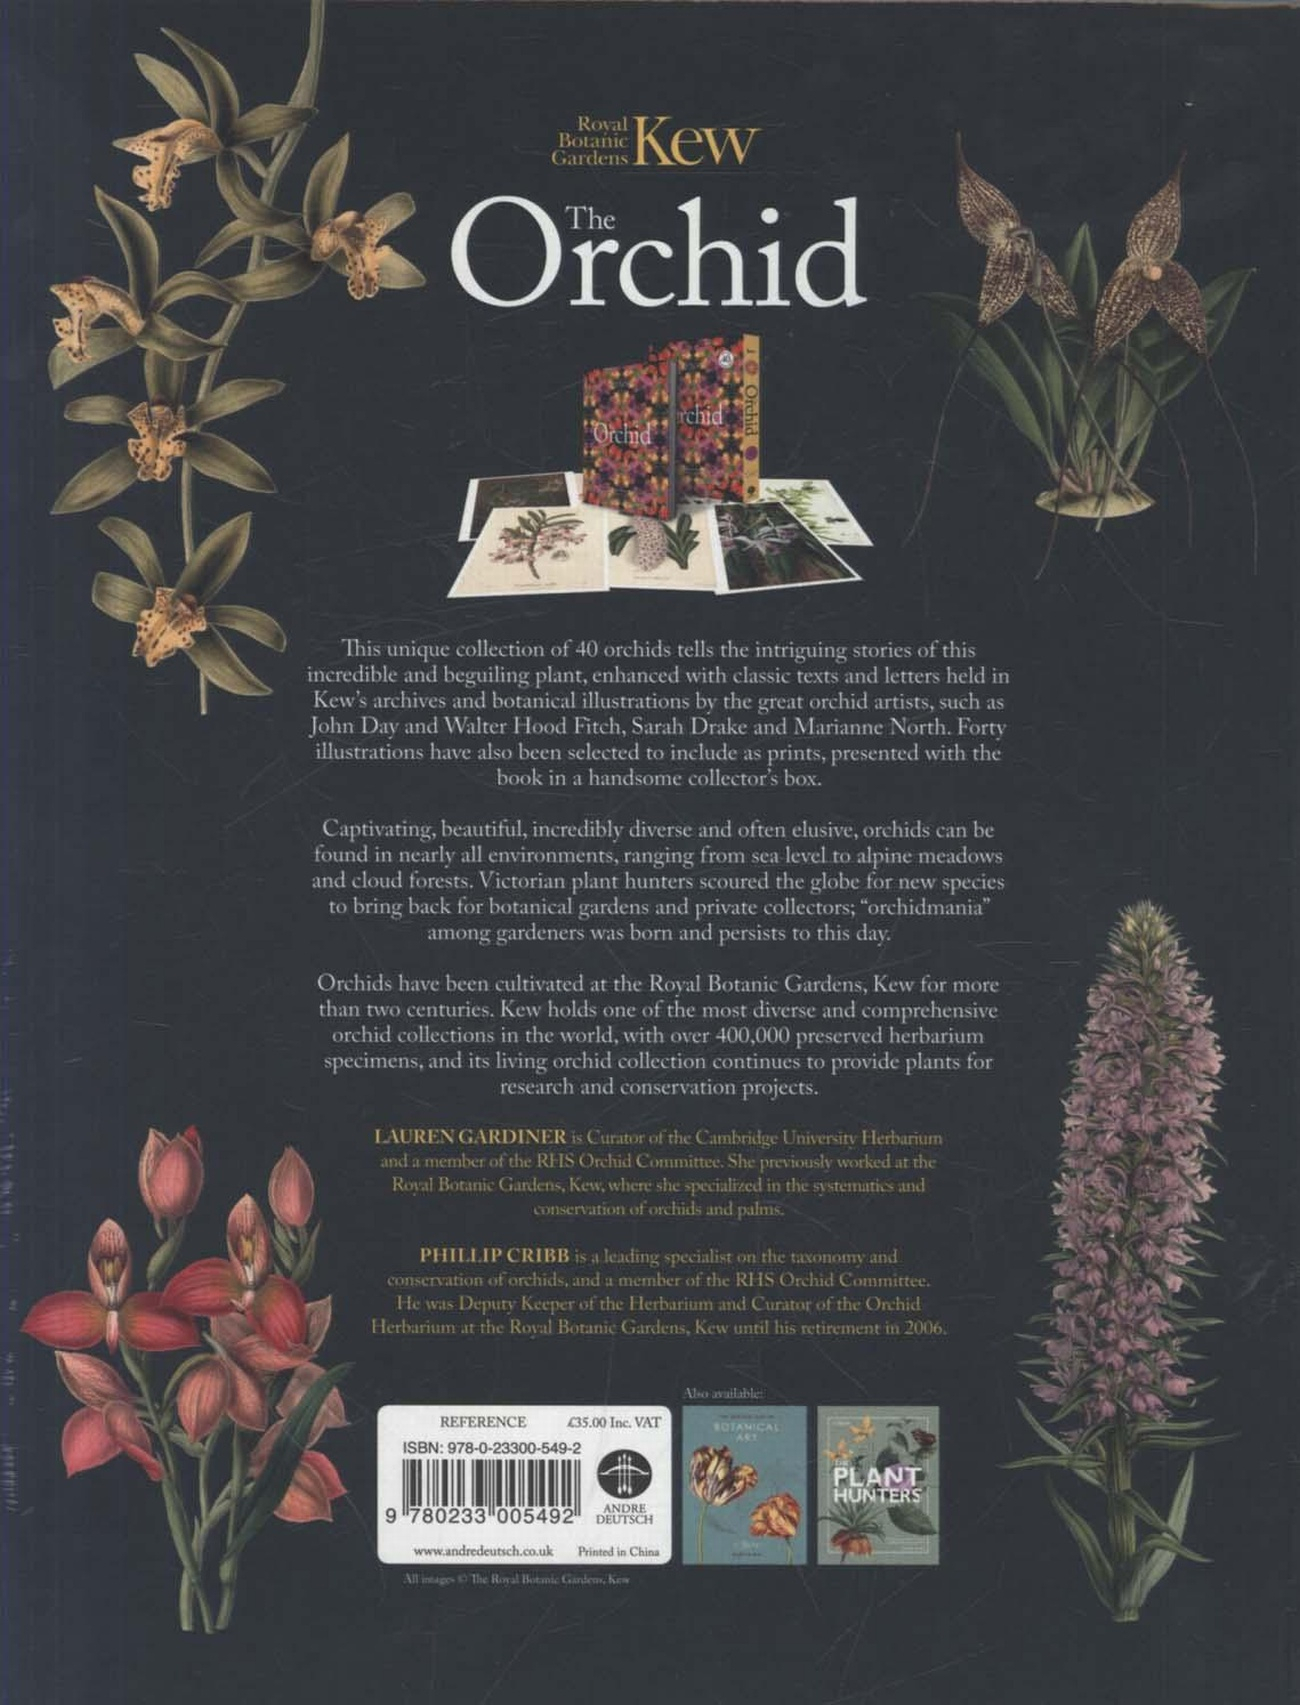 The Orchid (Royal Botanical Gardens, Kew) From Summerfield Books for Kew Book Of Botanical Illustration